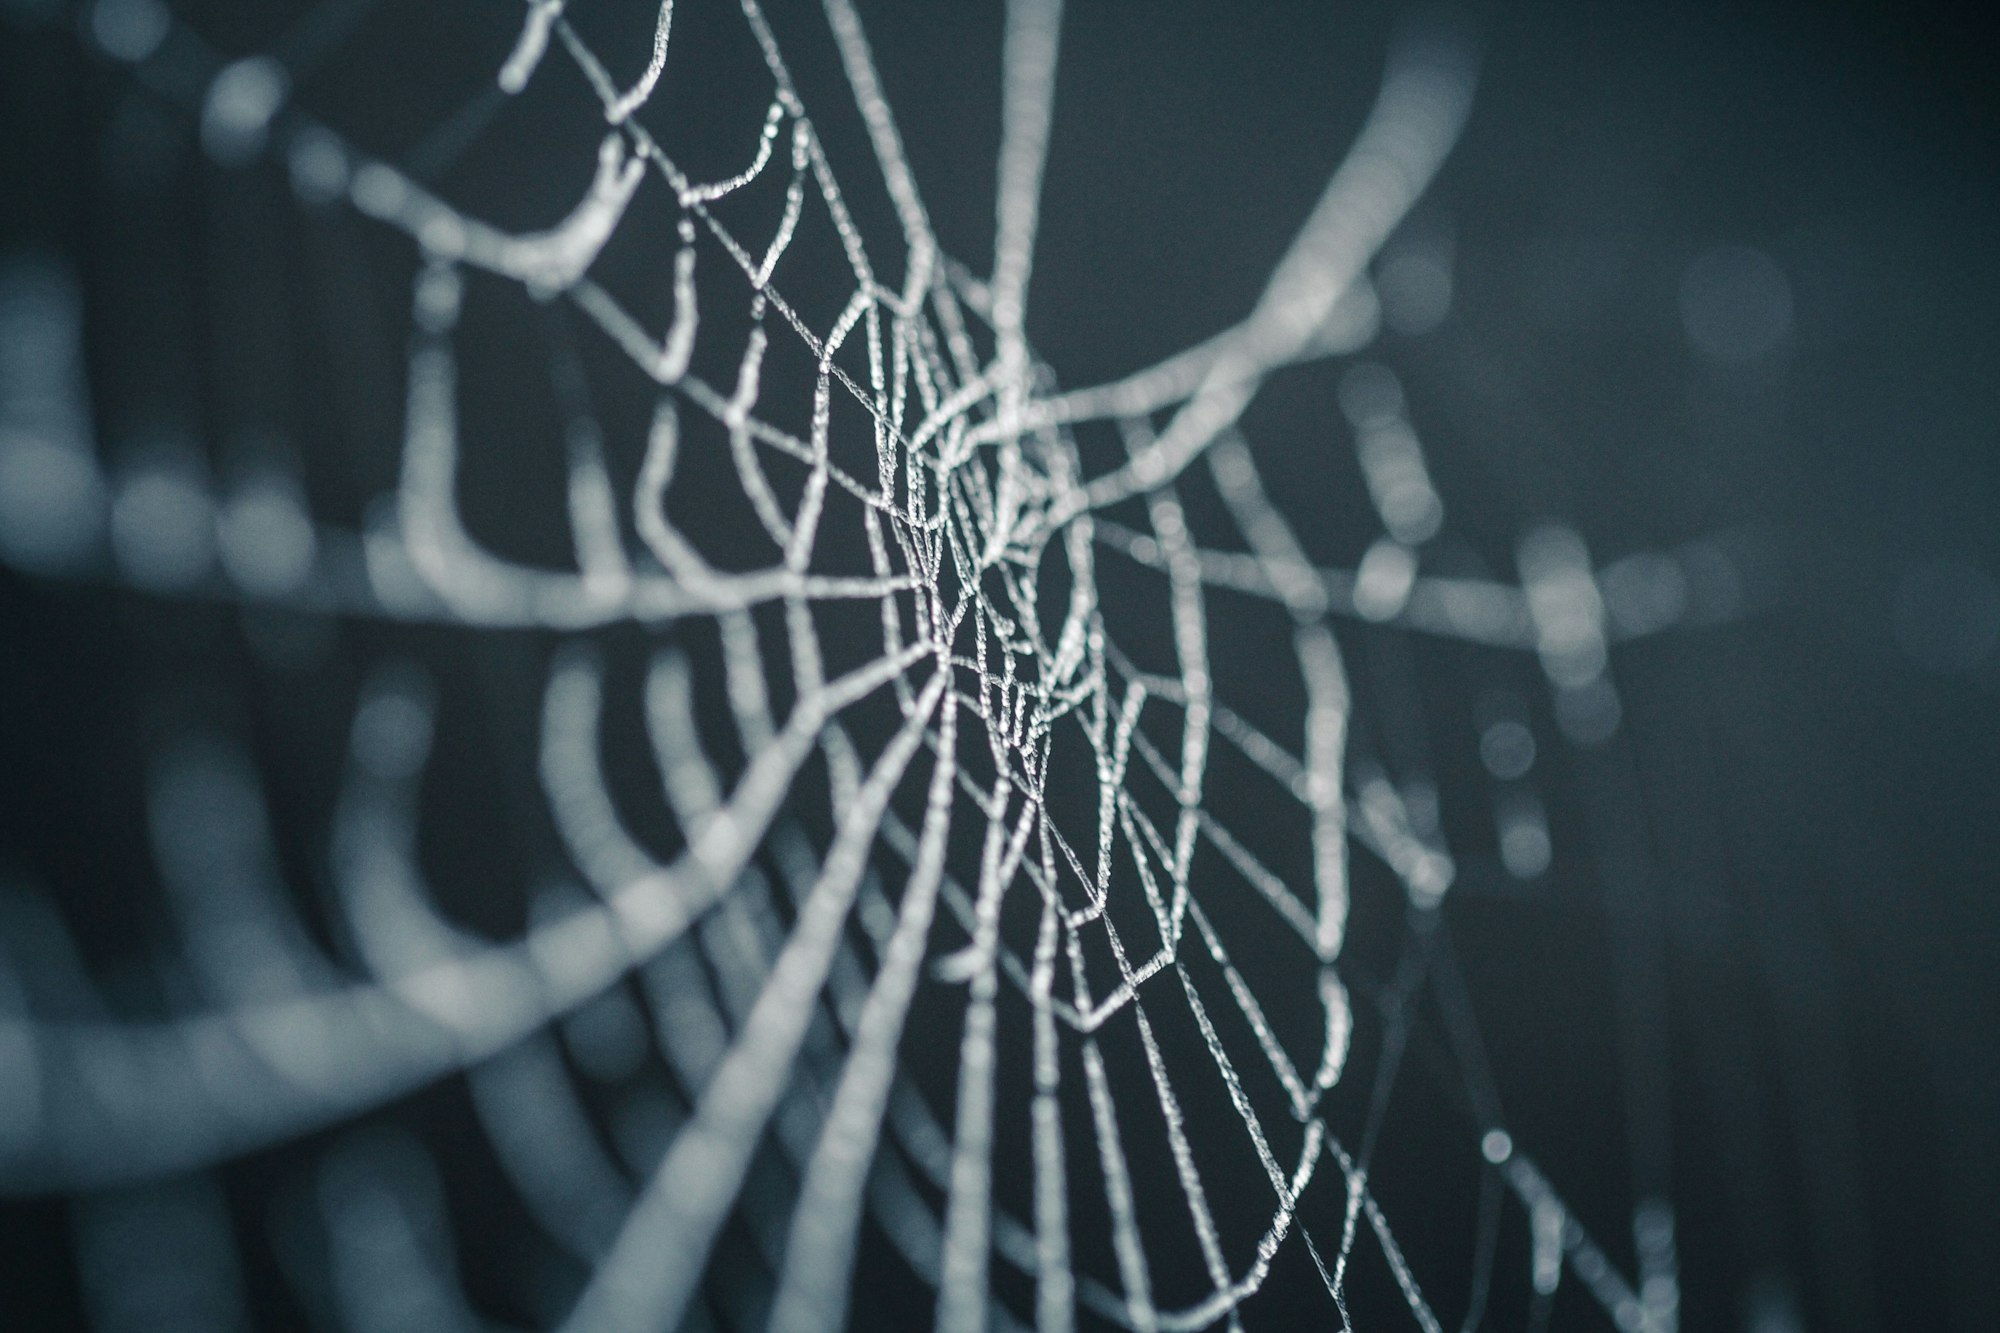 A frozen morning can reveal amazing little things. Before going to work, I took a few minutes to shoot this iced spider web, an abandoned kingdom in the middle of winter. I really love the power of macro photography to throw you in miniature and parallel worlds, so a garden becomes a universe to explore for hours…